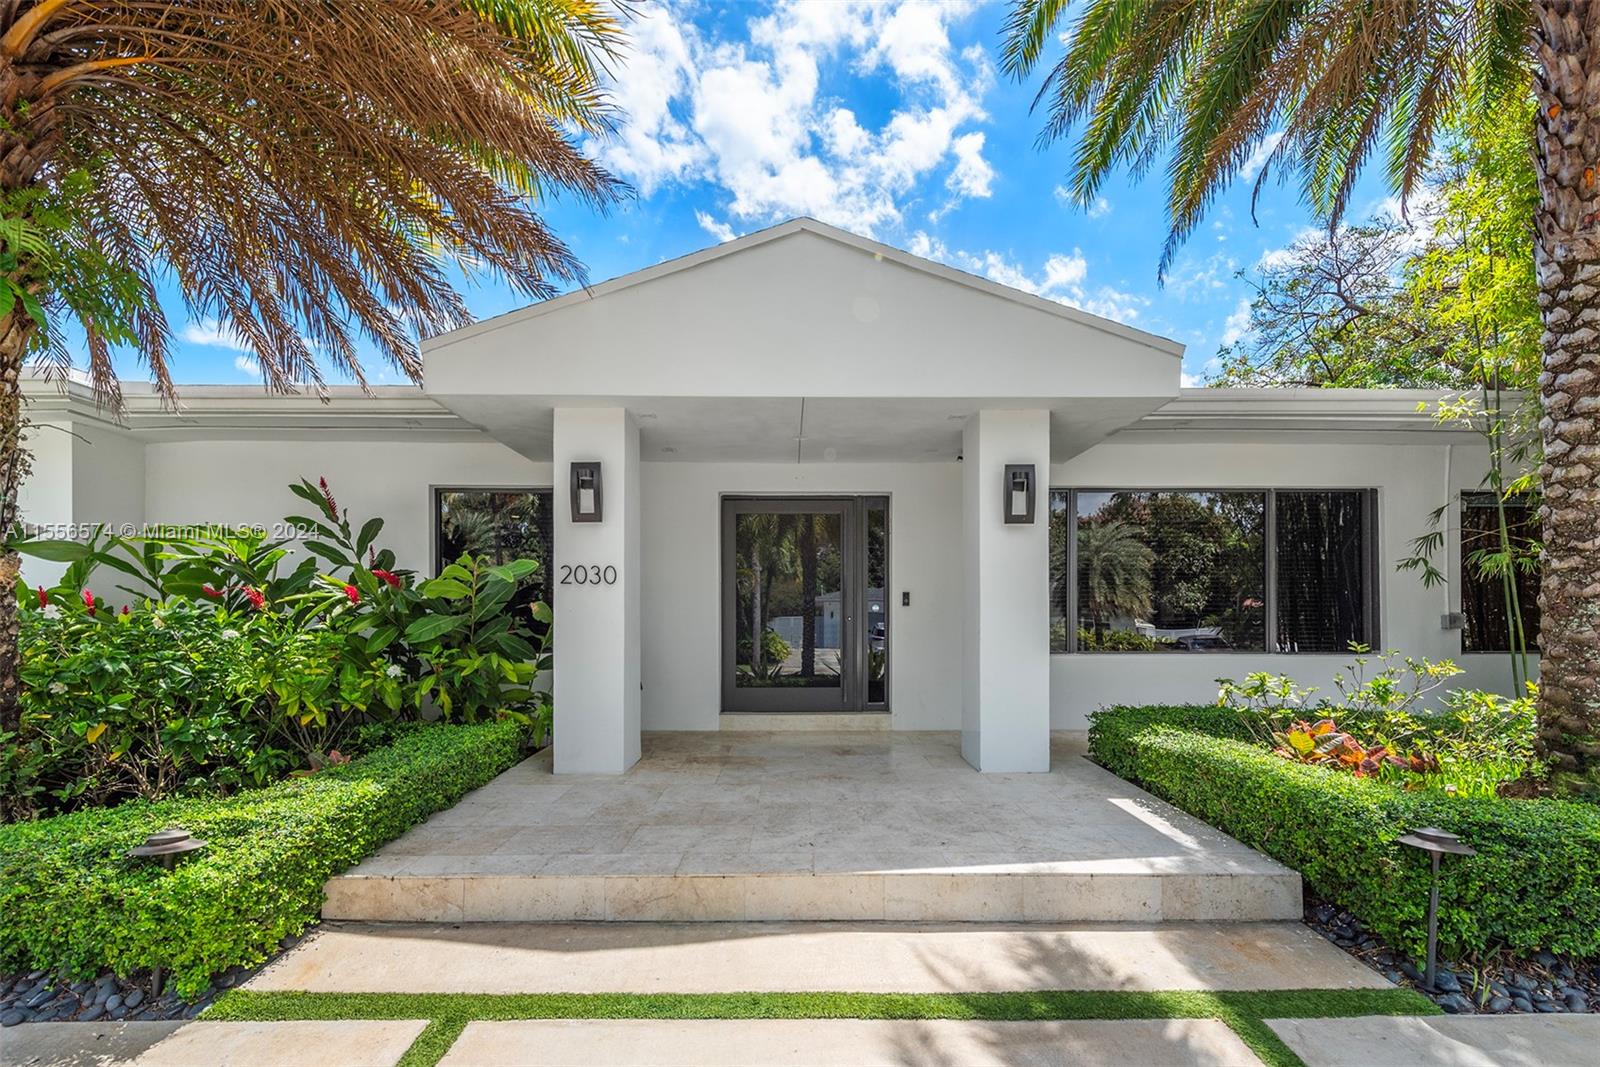 2030 NE 186th Dr, North Miami Beach, Florida 33179, 4 Bedrooms Bedrooms, ,3 BathroomsBathrooms,Residential,For Sale,2030 NE 186th Dr,A11556574